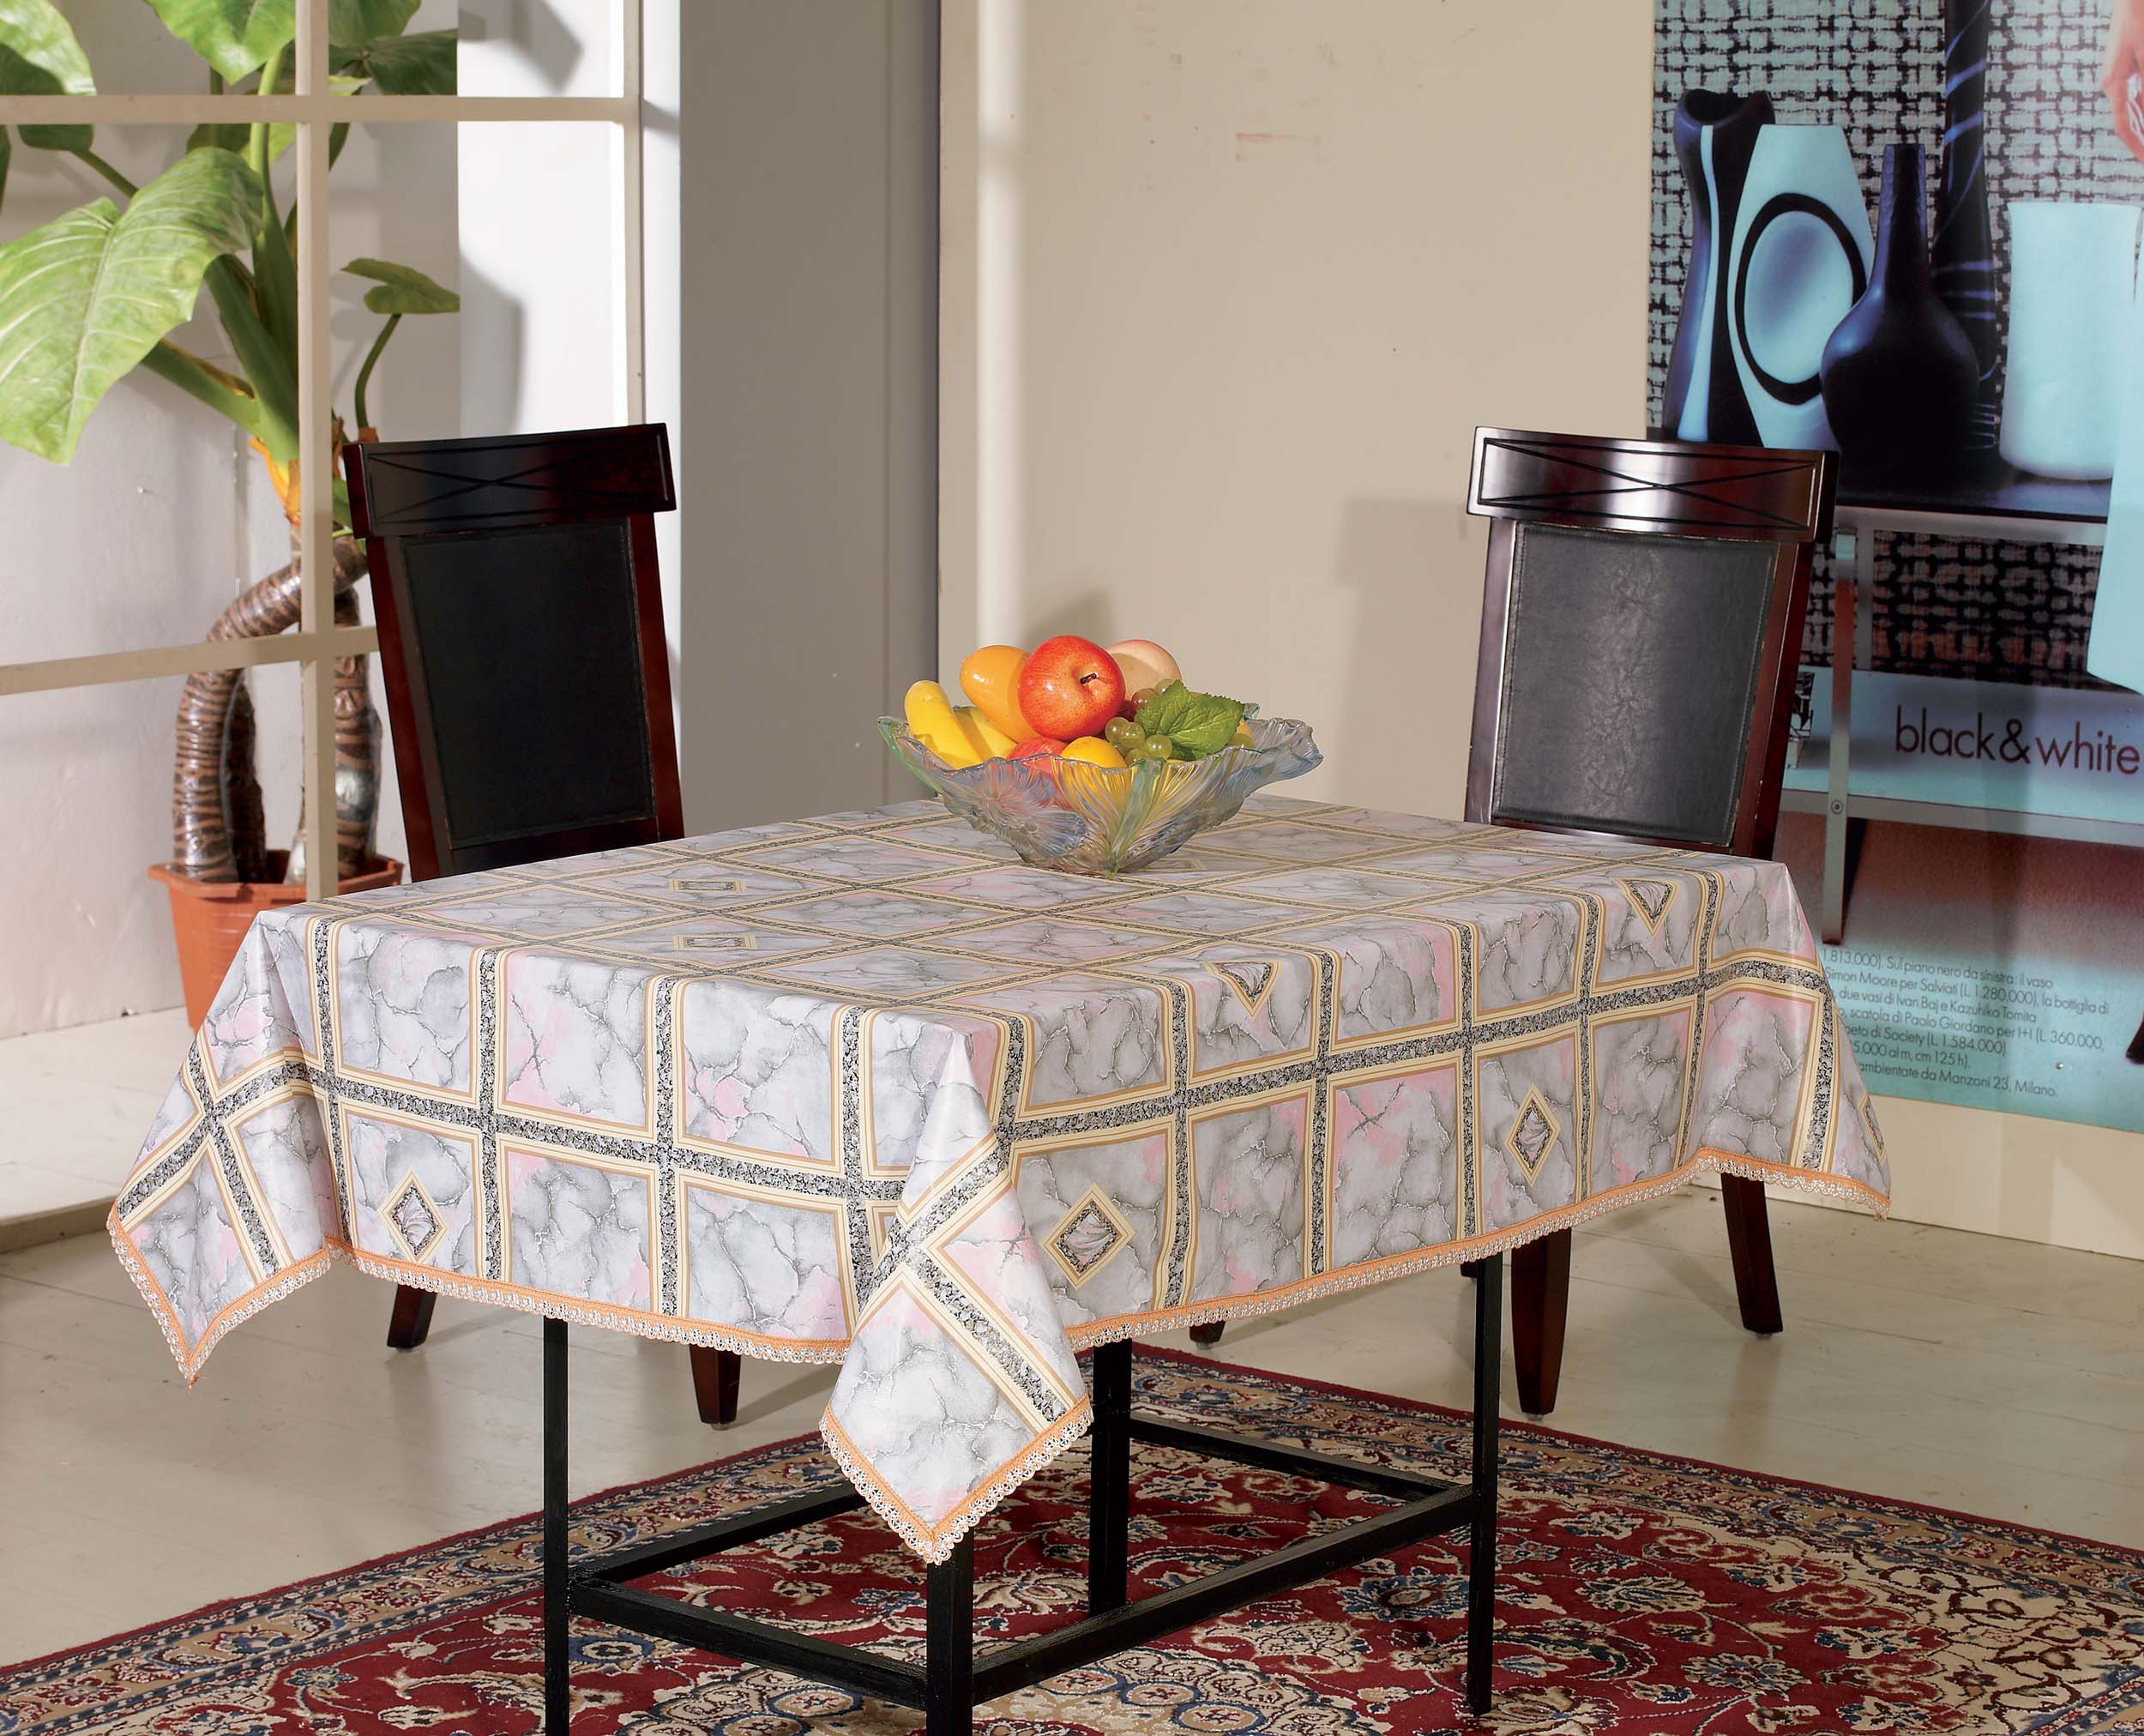 China Water-proof and Wipe Clean PVC Tablecloth with Crocheted Lace Trim on sale